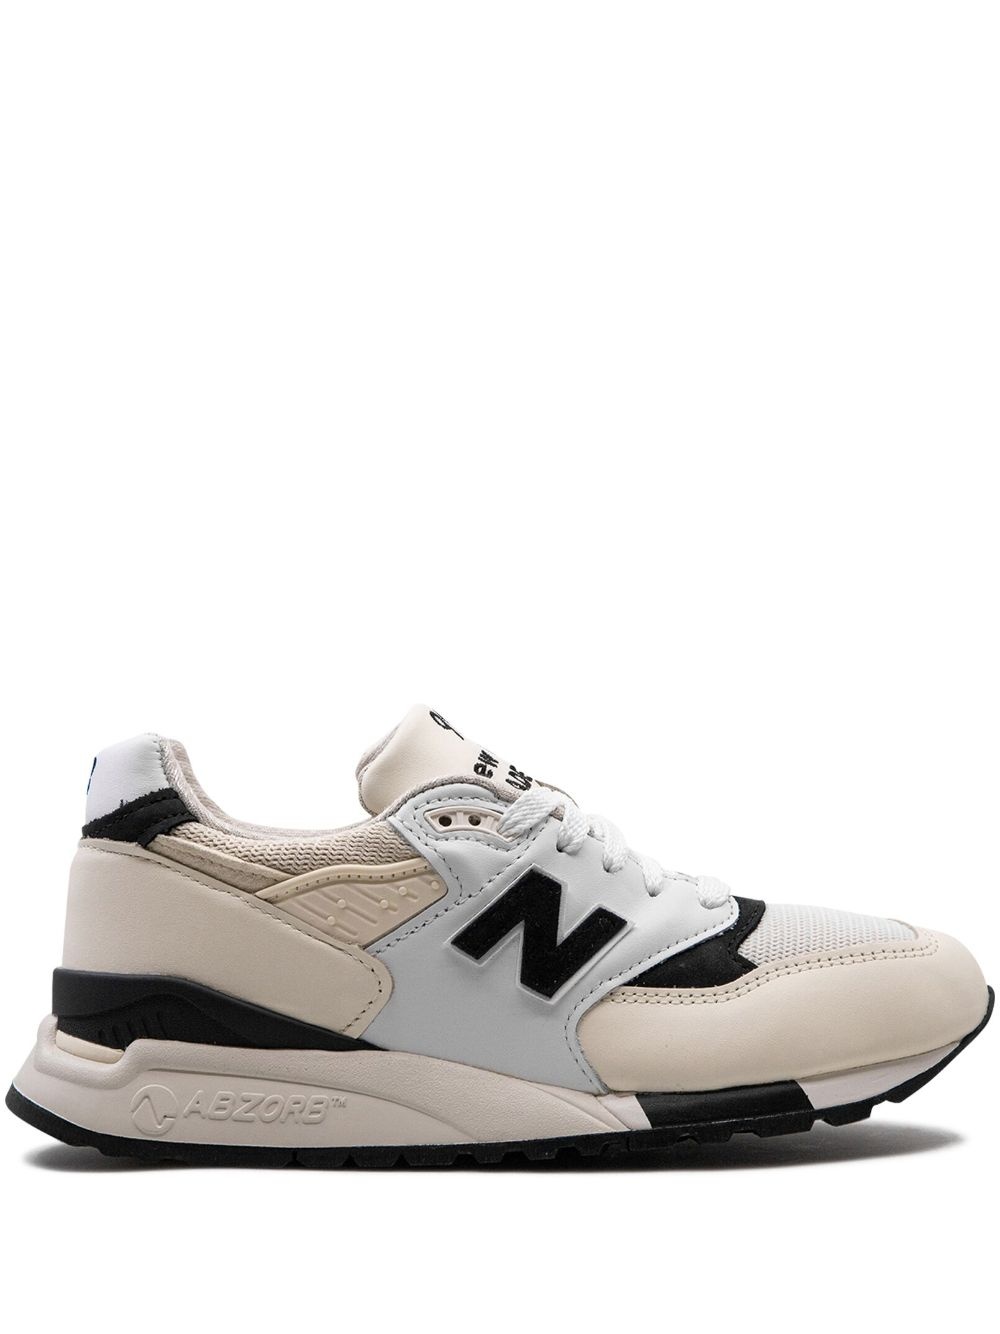 998 Made in USA "White/Black" sneakers - 1